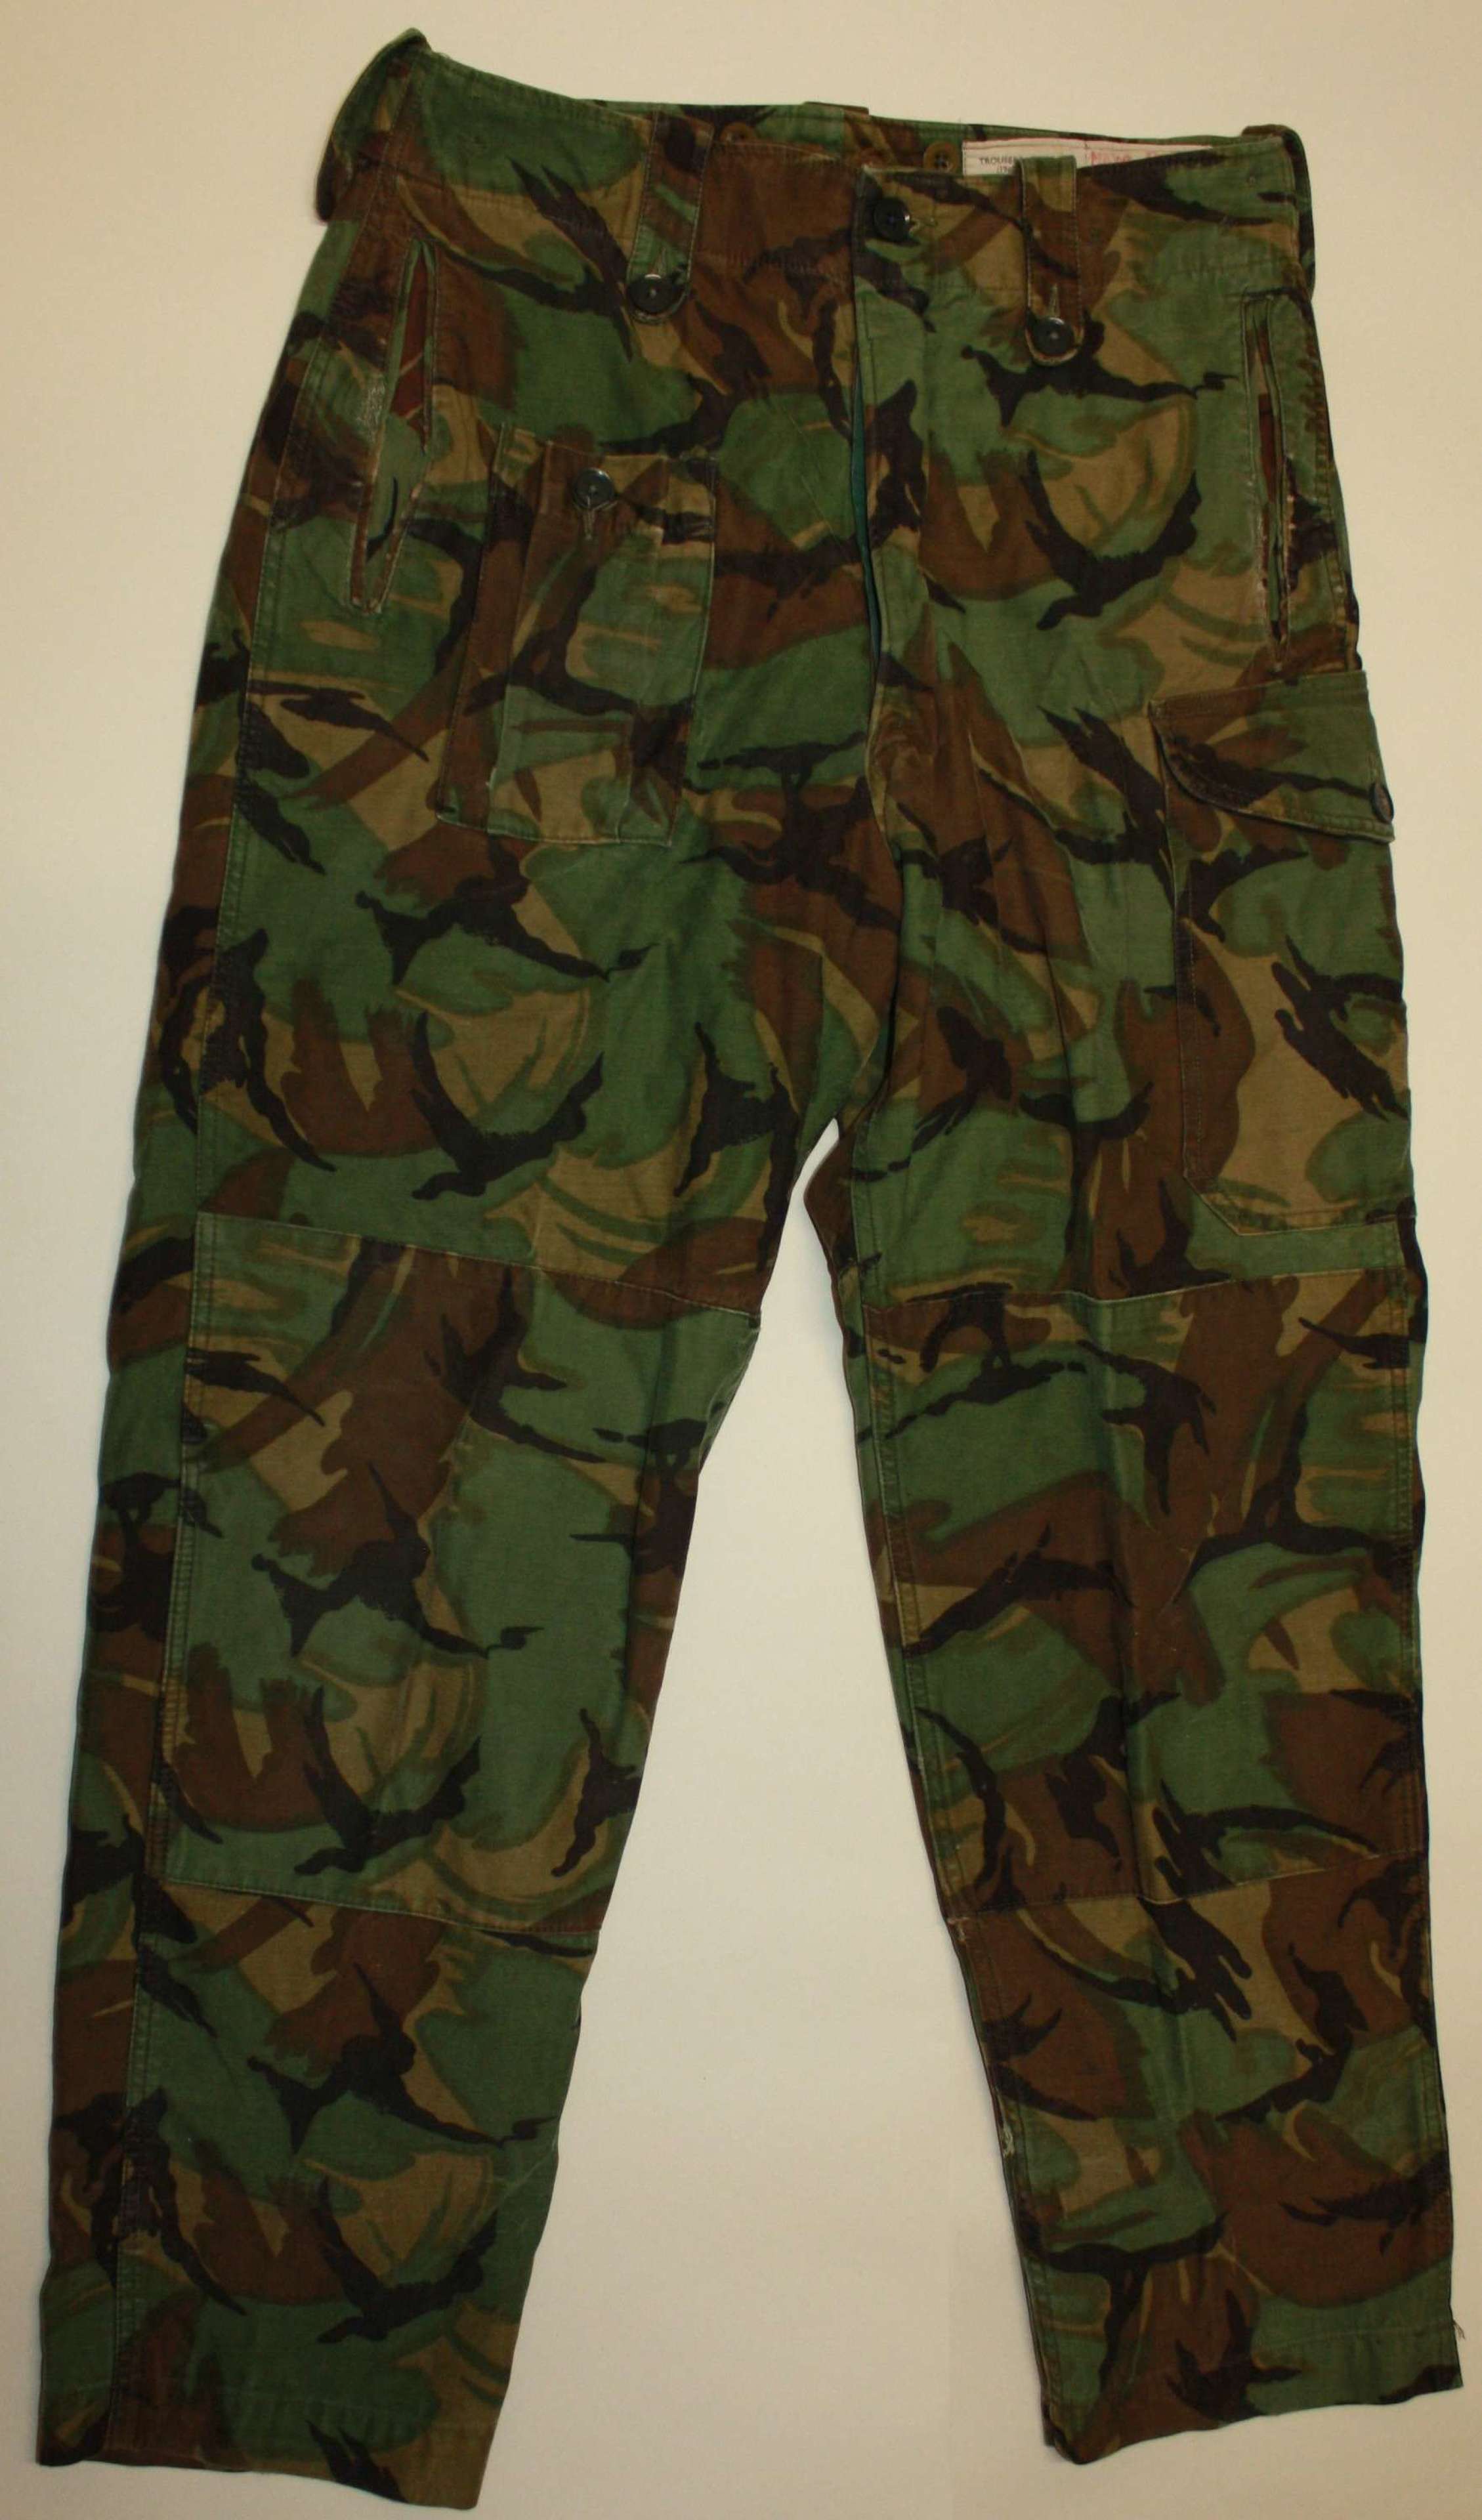 A GOOD USED PAIR OF THE 1960 PATTERN DPM TROUSERS SIZE 2